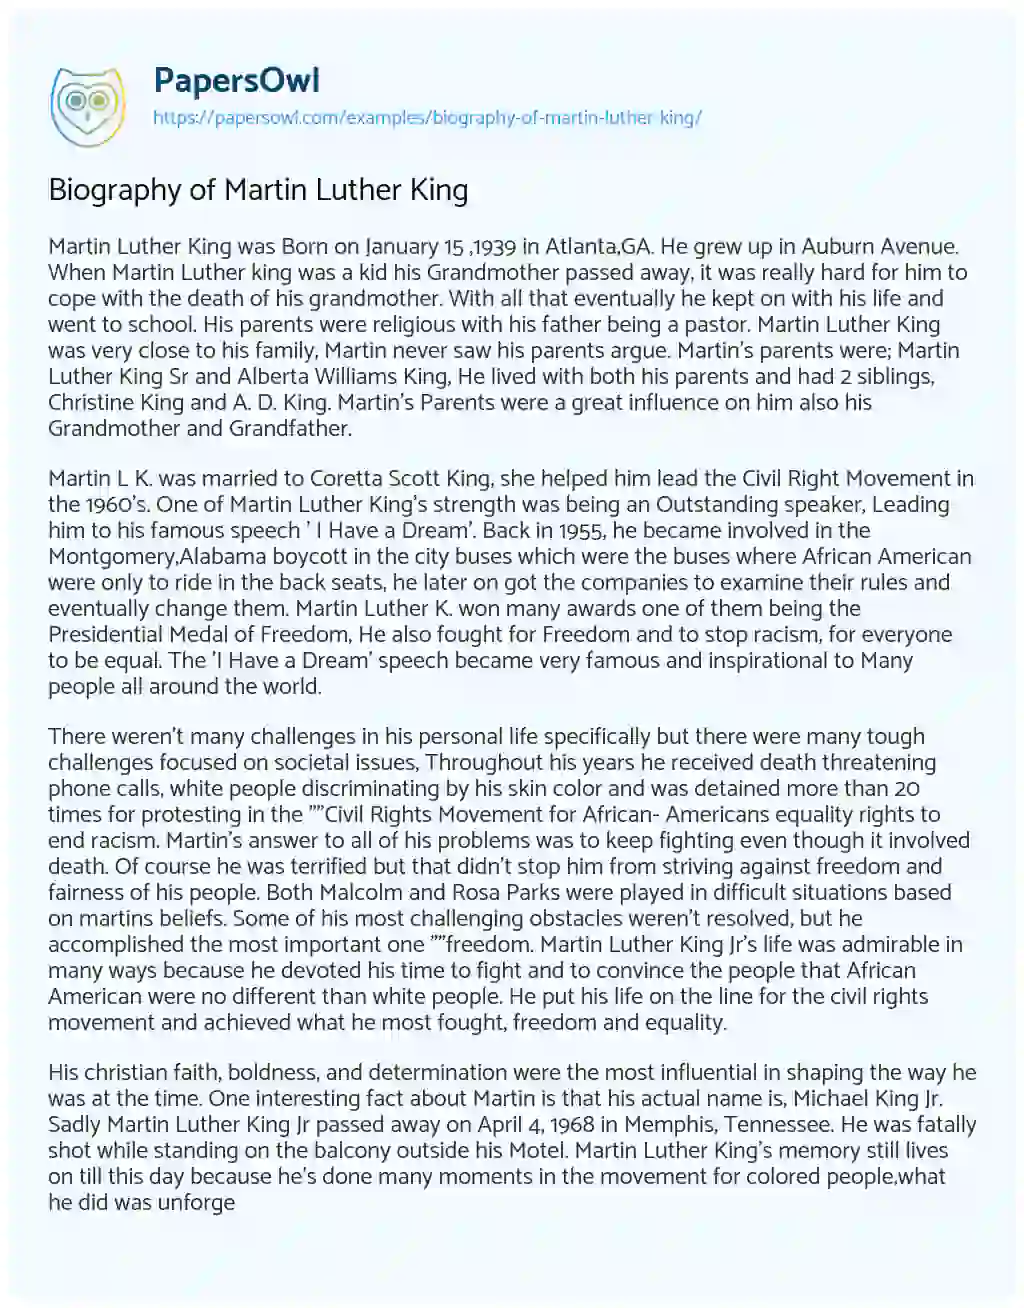 Essay on Biography of Martin Luther King